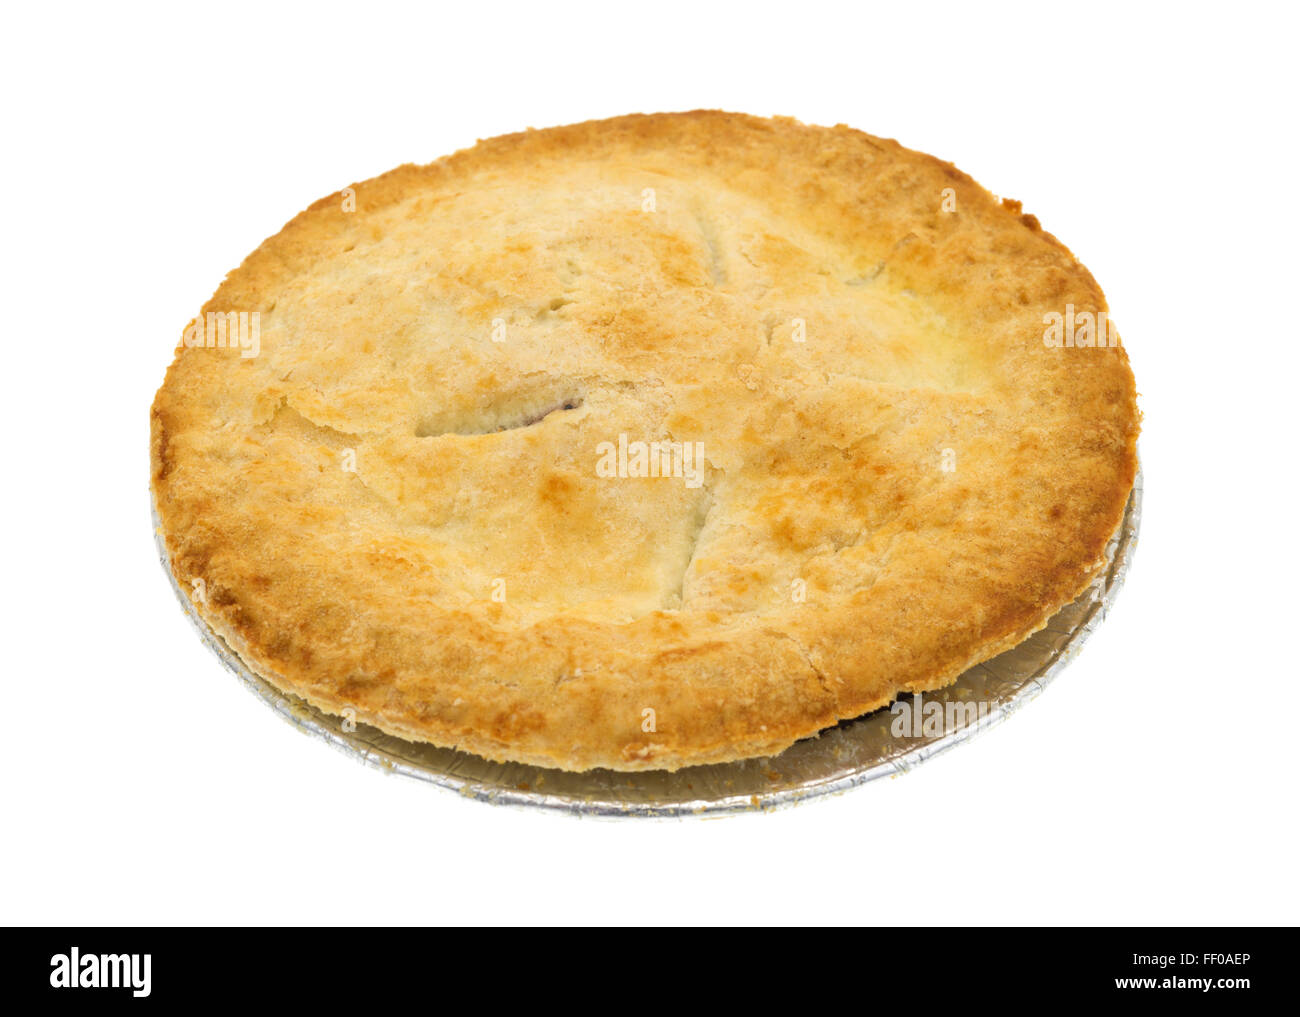 Side view of a small personal size fruit filled pie in a tinfoil dish isolated on a white background. Stock Photo